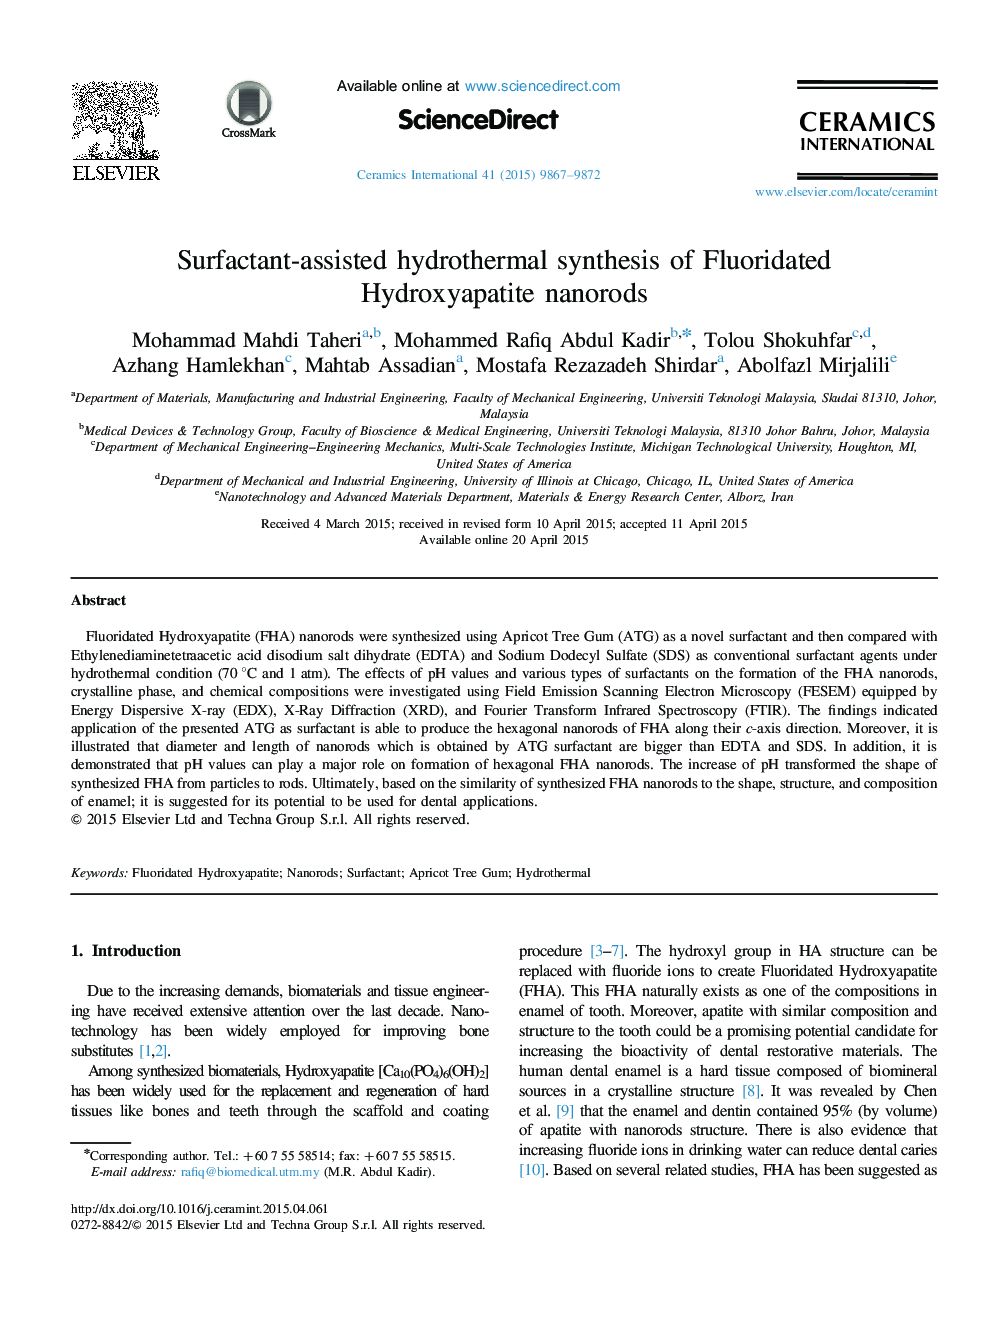 Surfactant-assisted hydrothermal synthesis of Fluoridated Hydroxyapatite nanorods